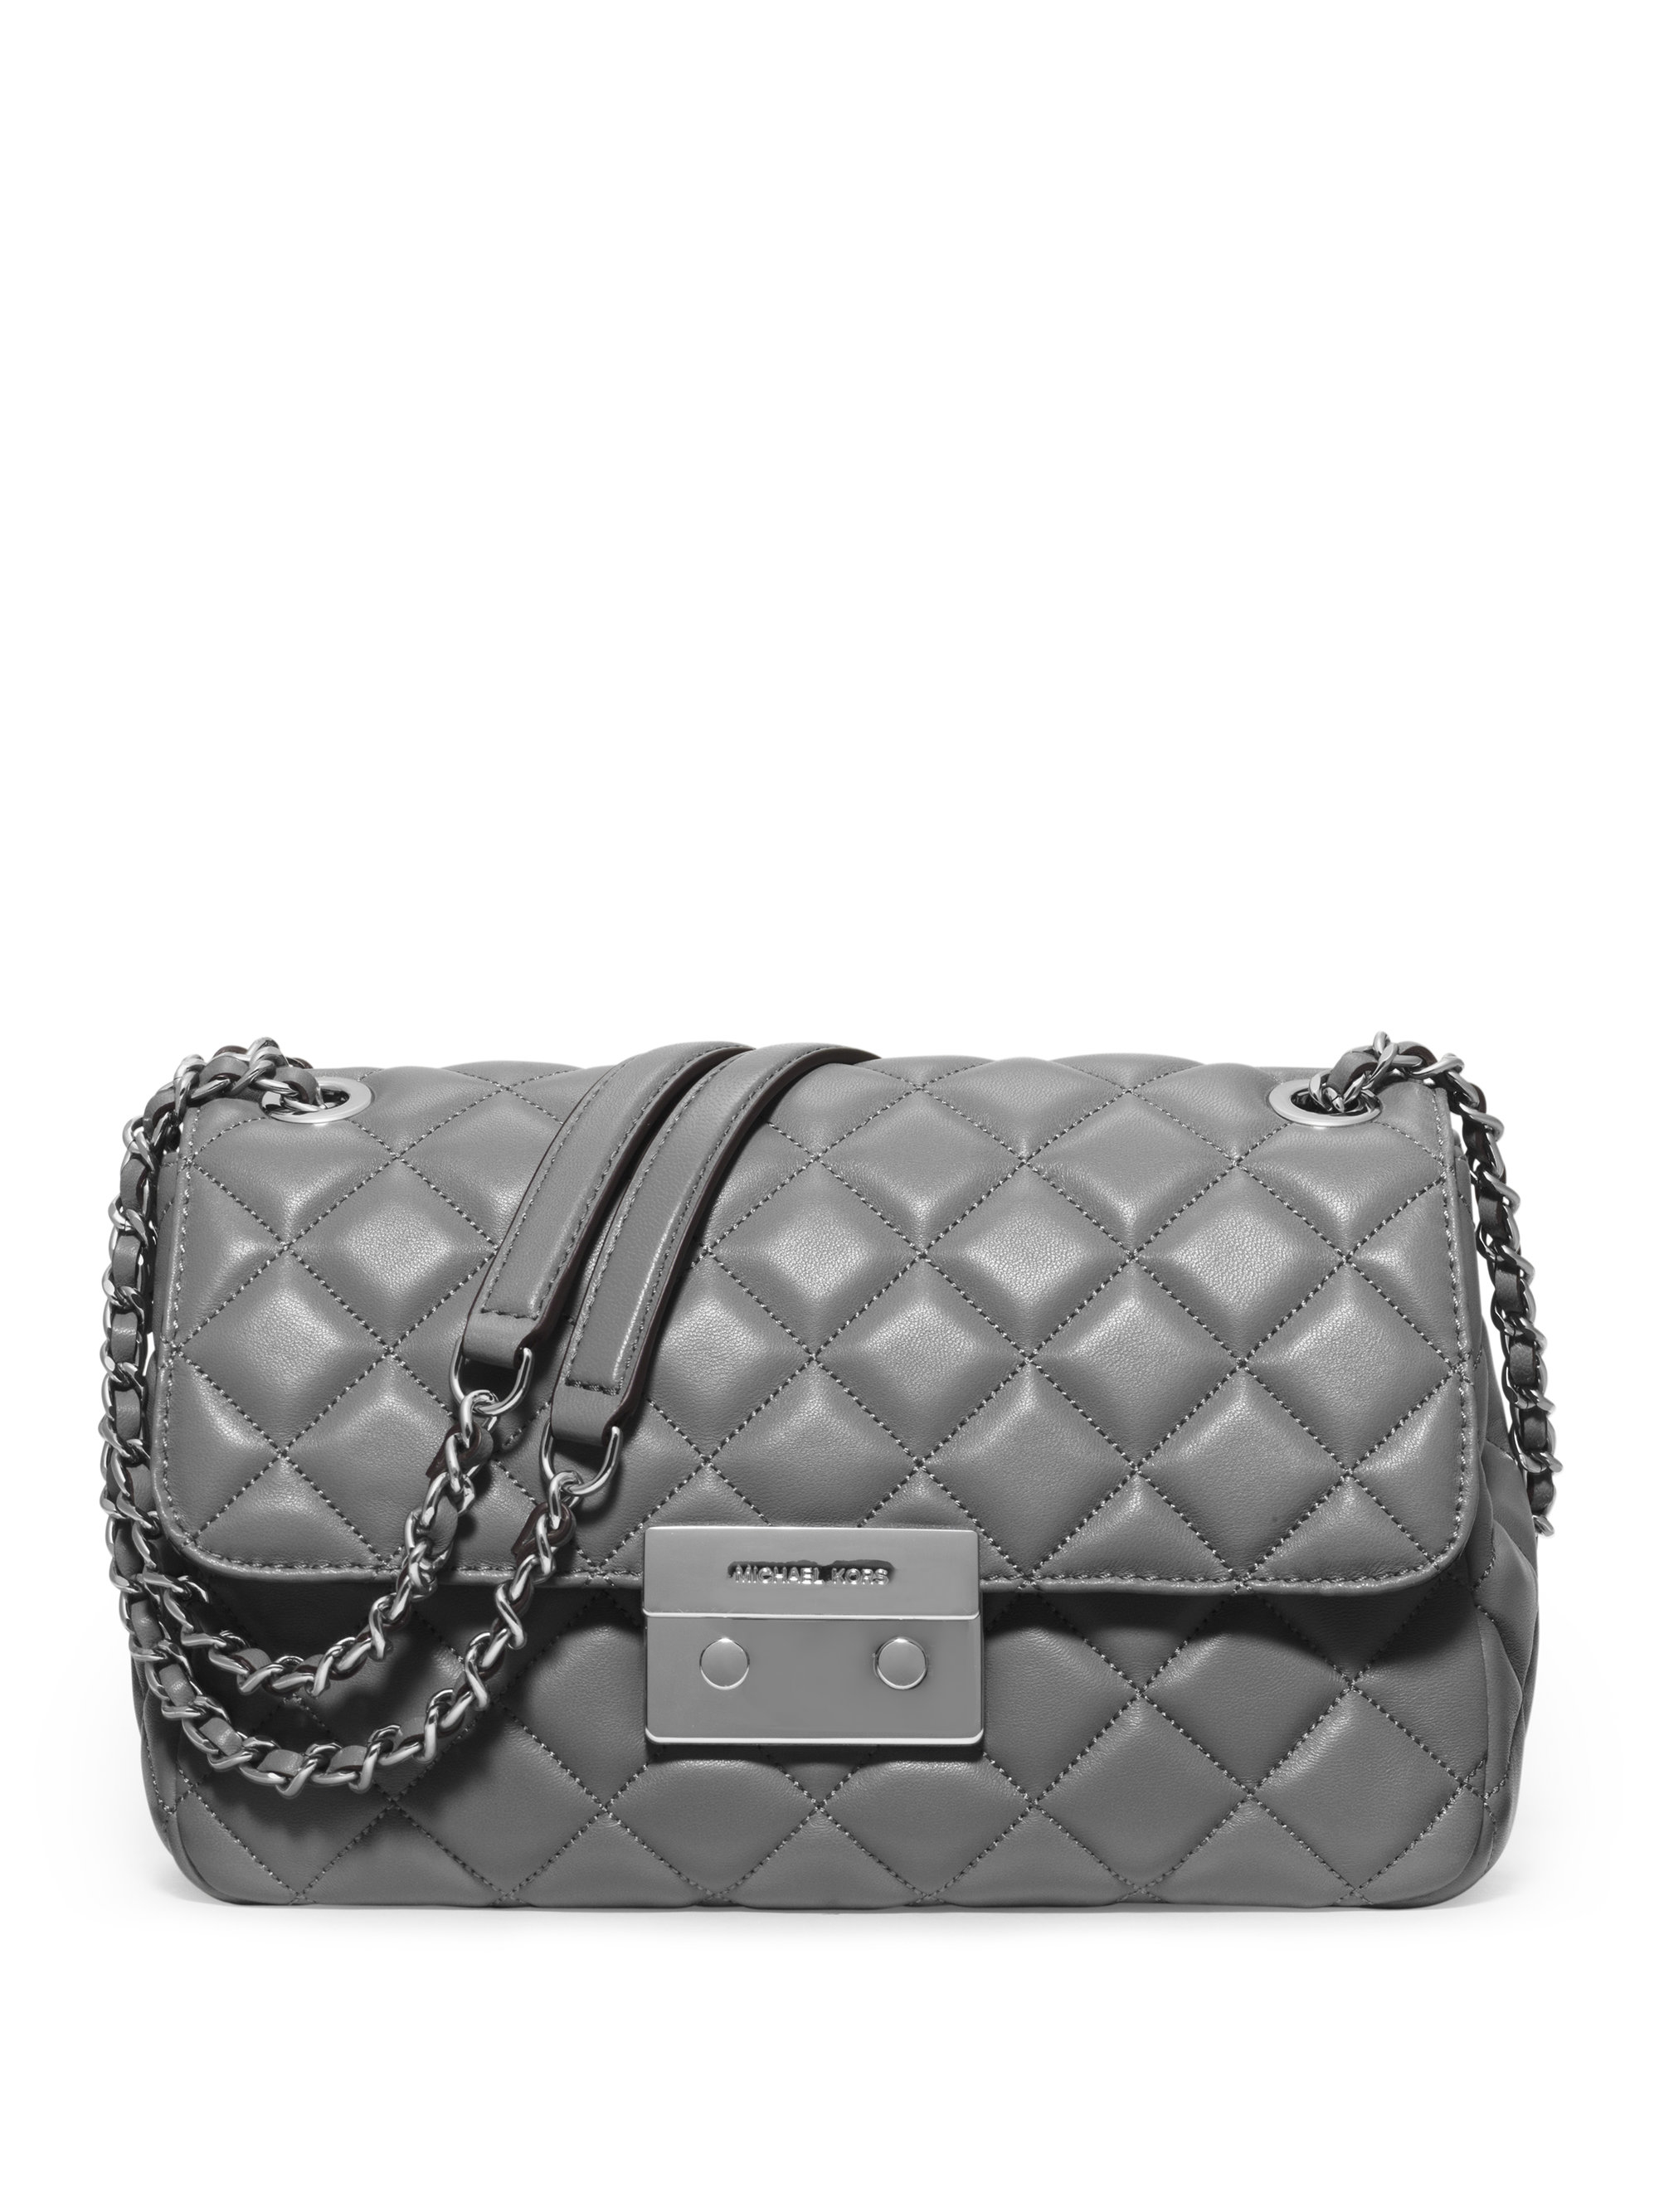 MICHAEL Michael Kors Sloan Large Quilted Leather Shoulder Bag in Steel Grey (Gray) - Lyst